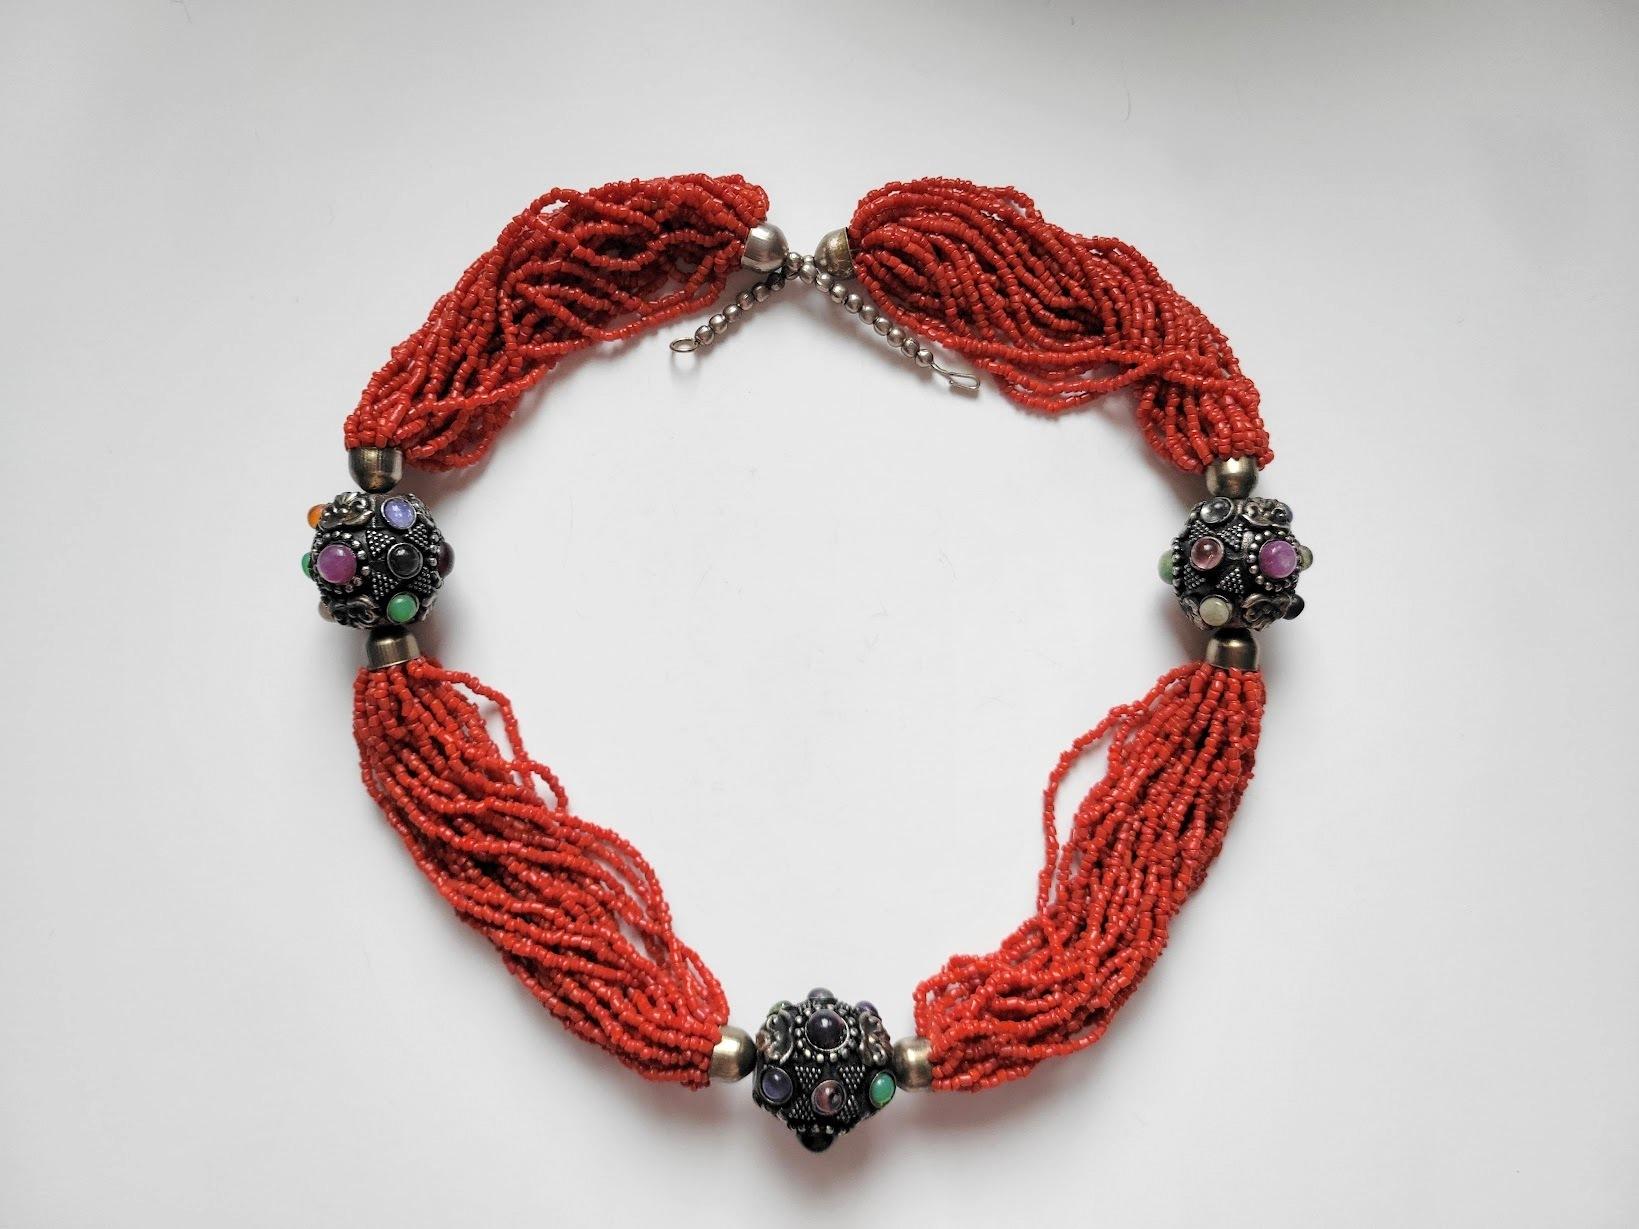 Behold this exquisite 24-strand necklace crafted with coral and silver, originating from Yemen in the heart of the Middle East. Measuring an impressive 27.5 inches, the necklace is a true spectacle. The delicate coral beads, ranging from 1.5 to 4mm,